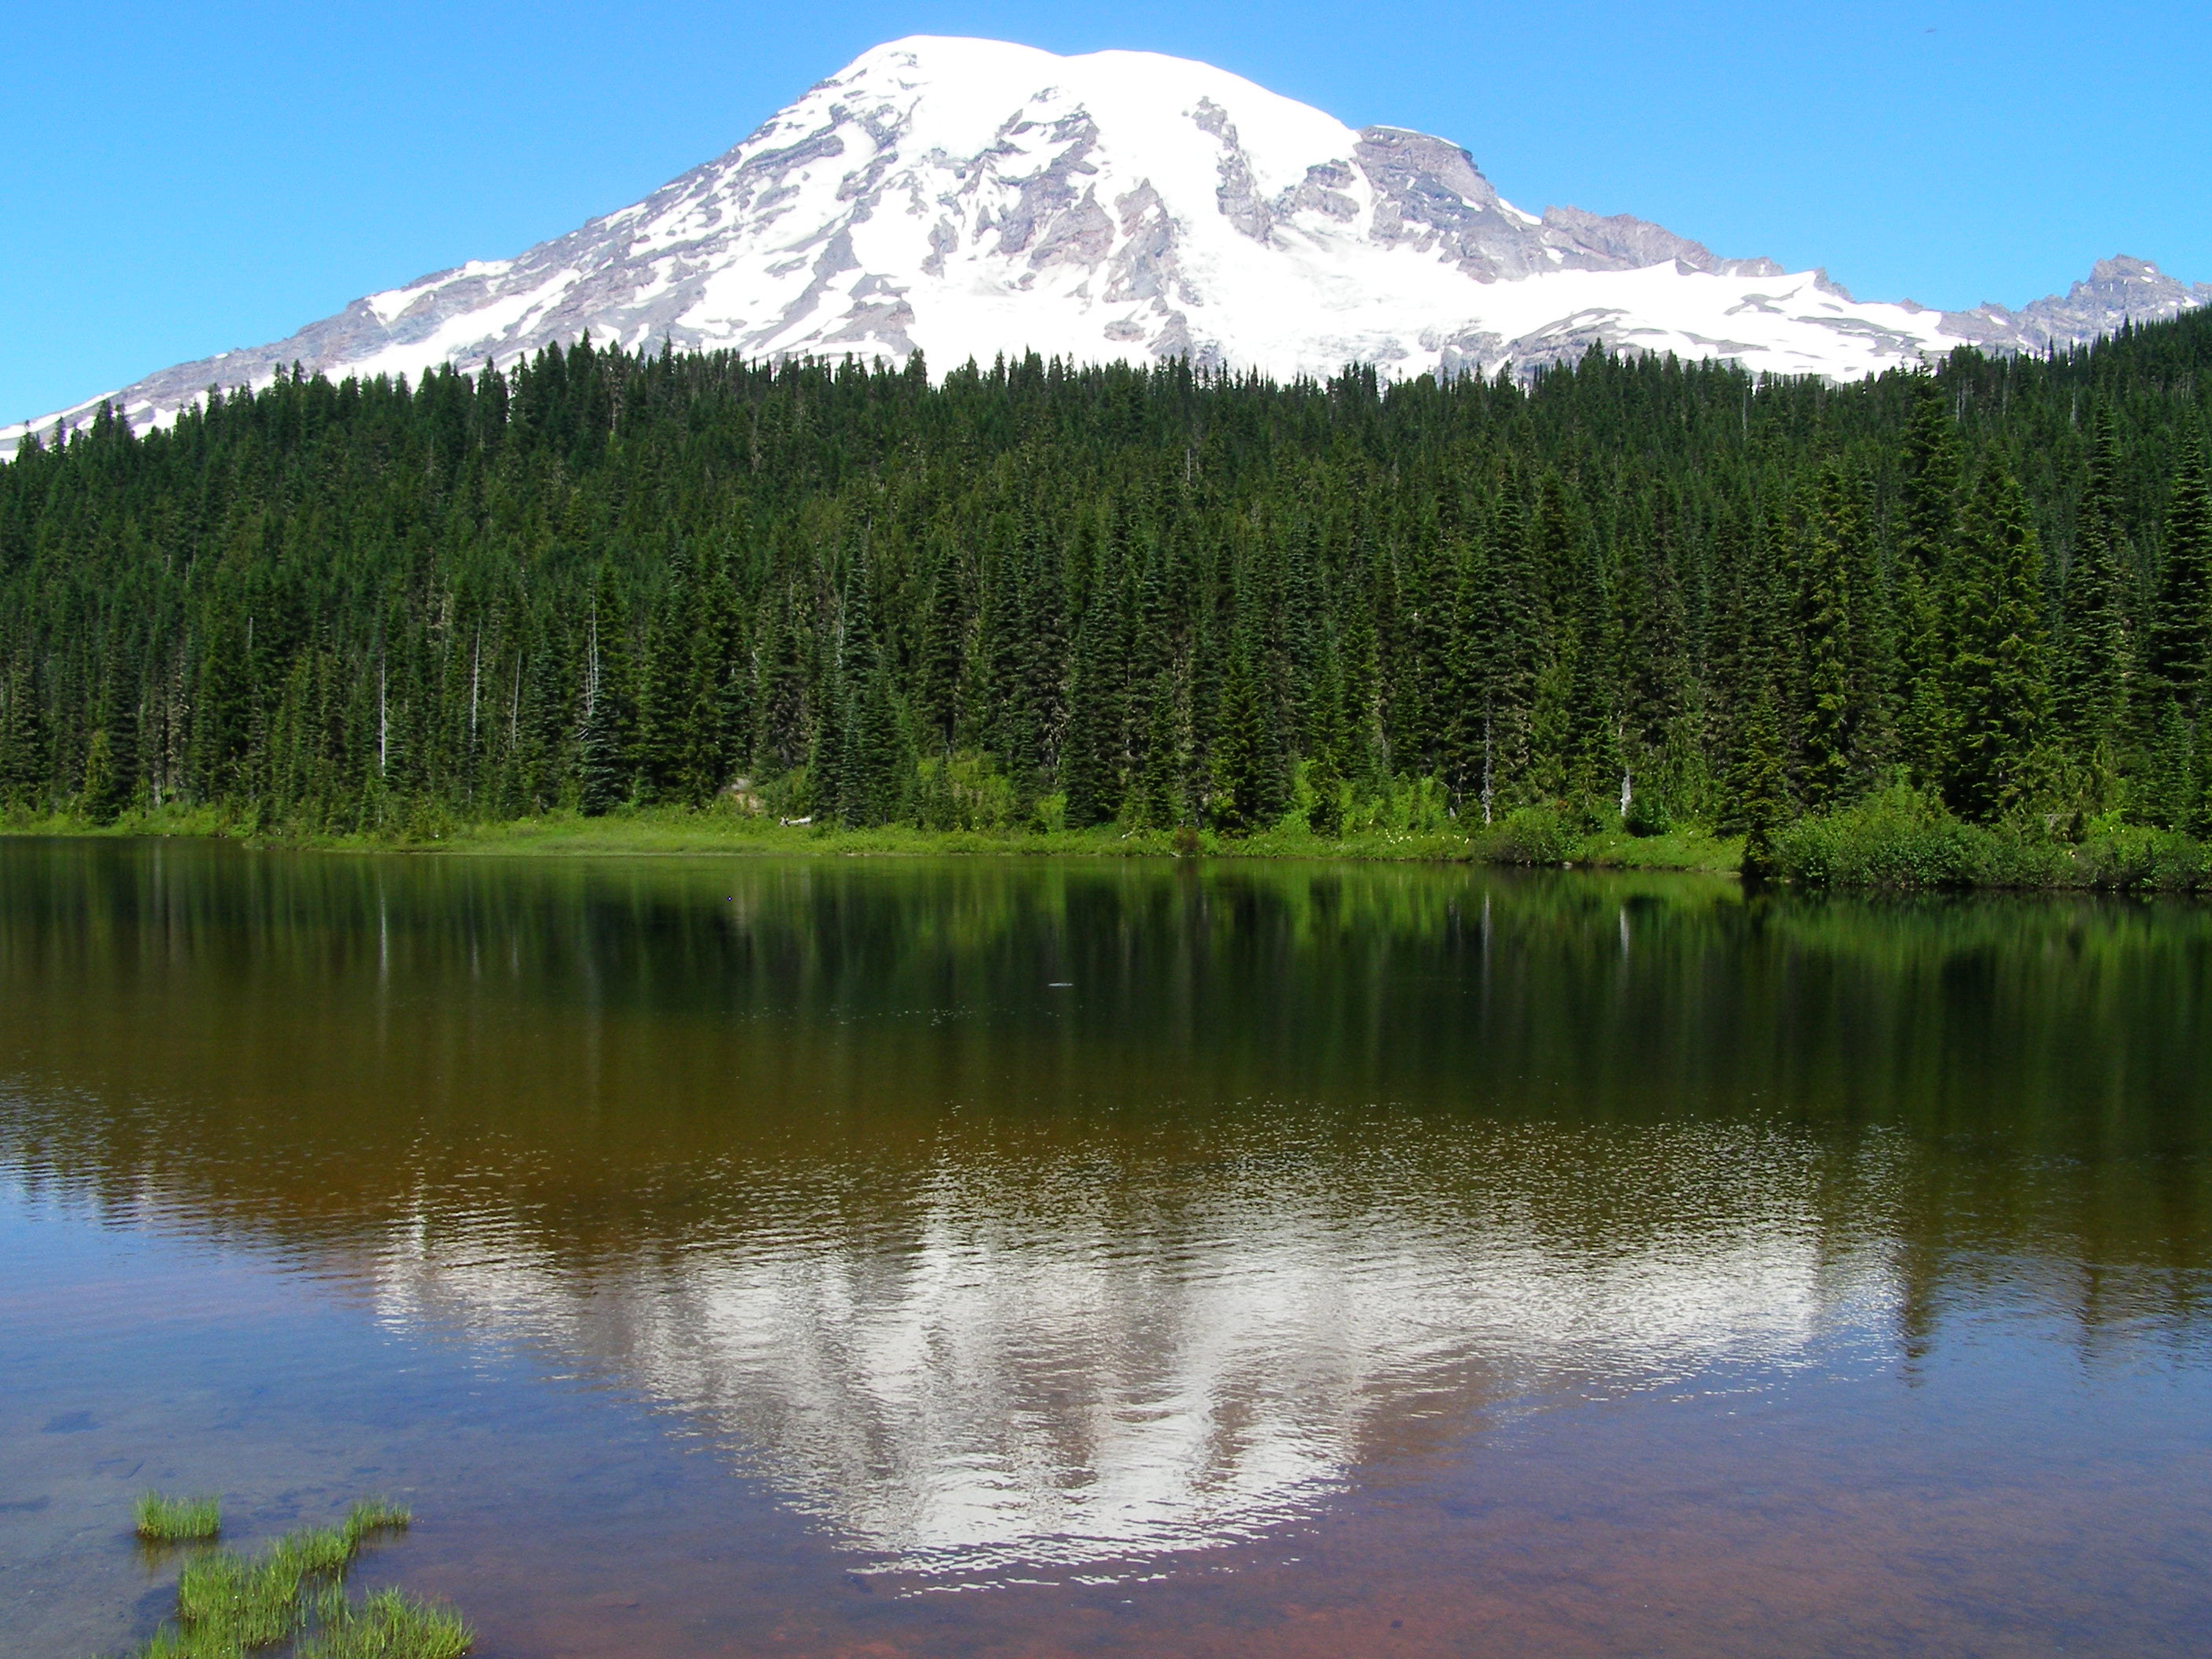 snow covered mountain near green trees and lake under blue sky, mount rainier